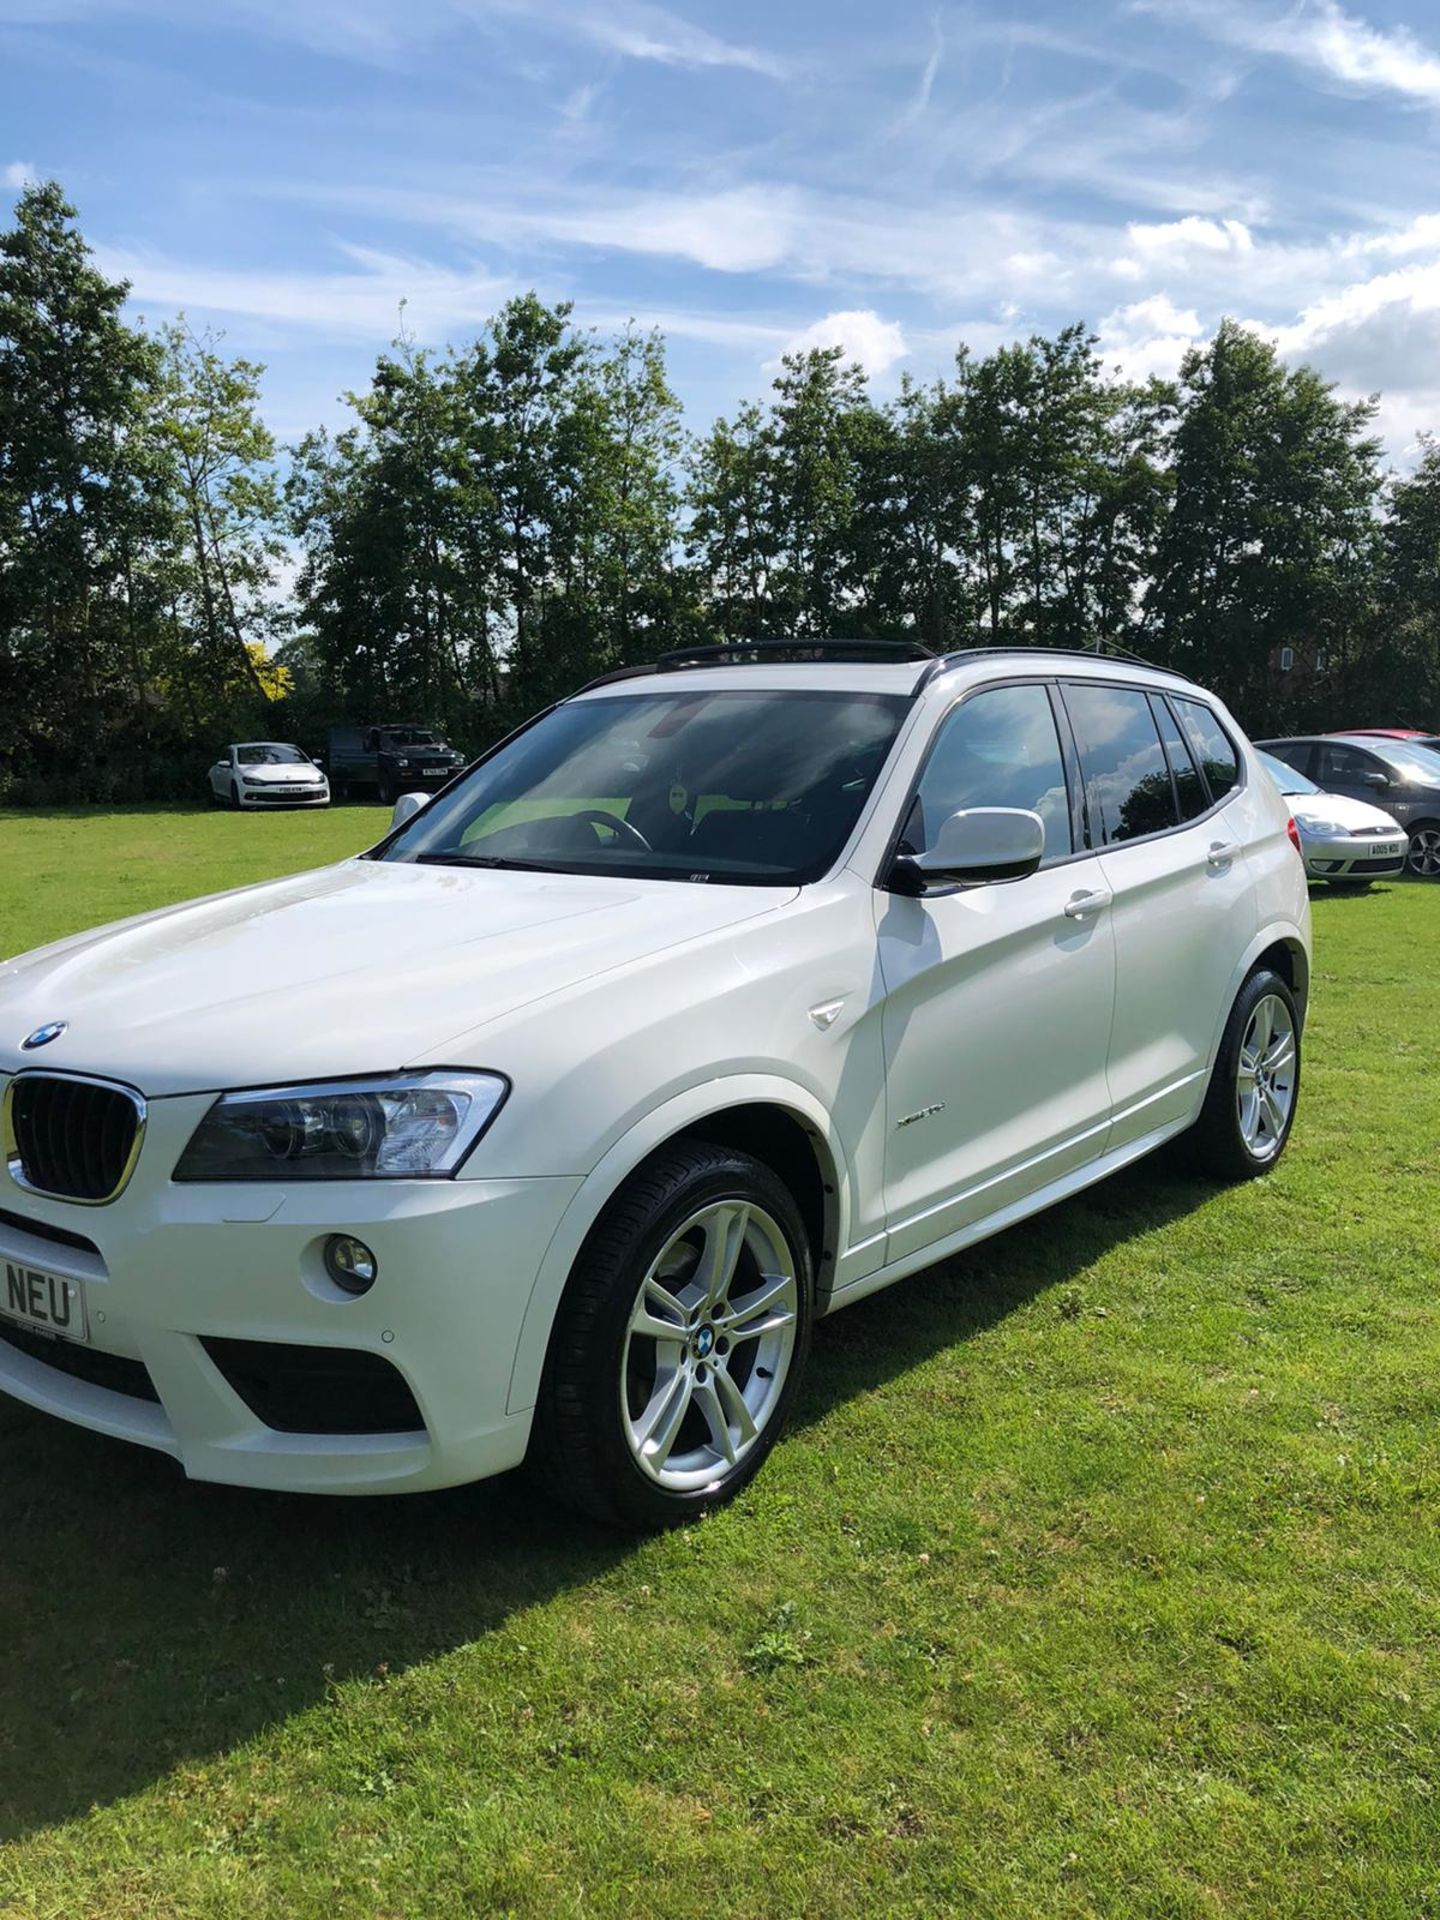 2012/62 REG BMW X3 XDRIVE 20D M SPORT 2.0 DIESEL AUTOMATIC 185 BHP, SHOWING 2 FORMER KEEPERS - Image 3 of 16